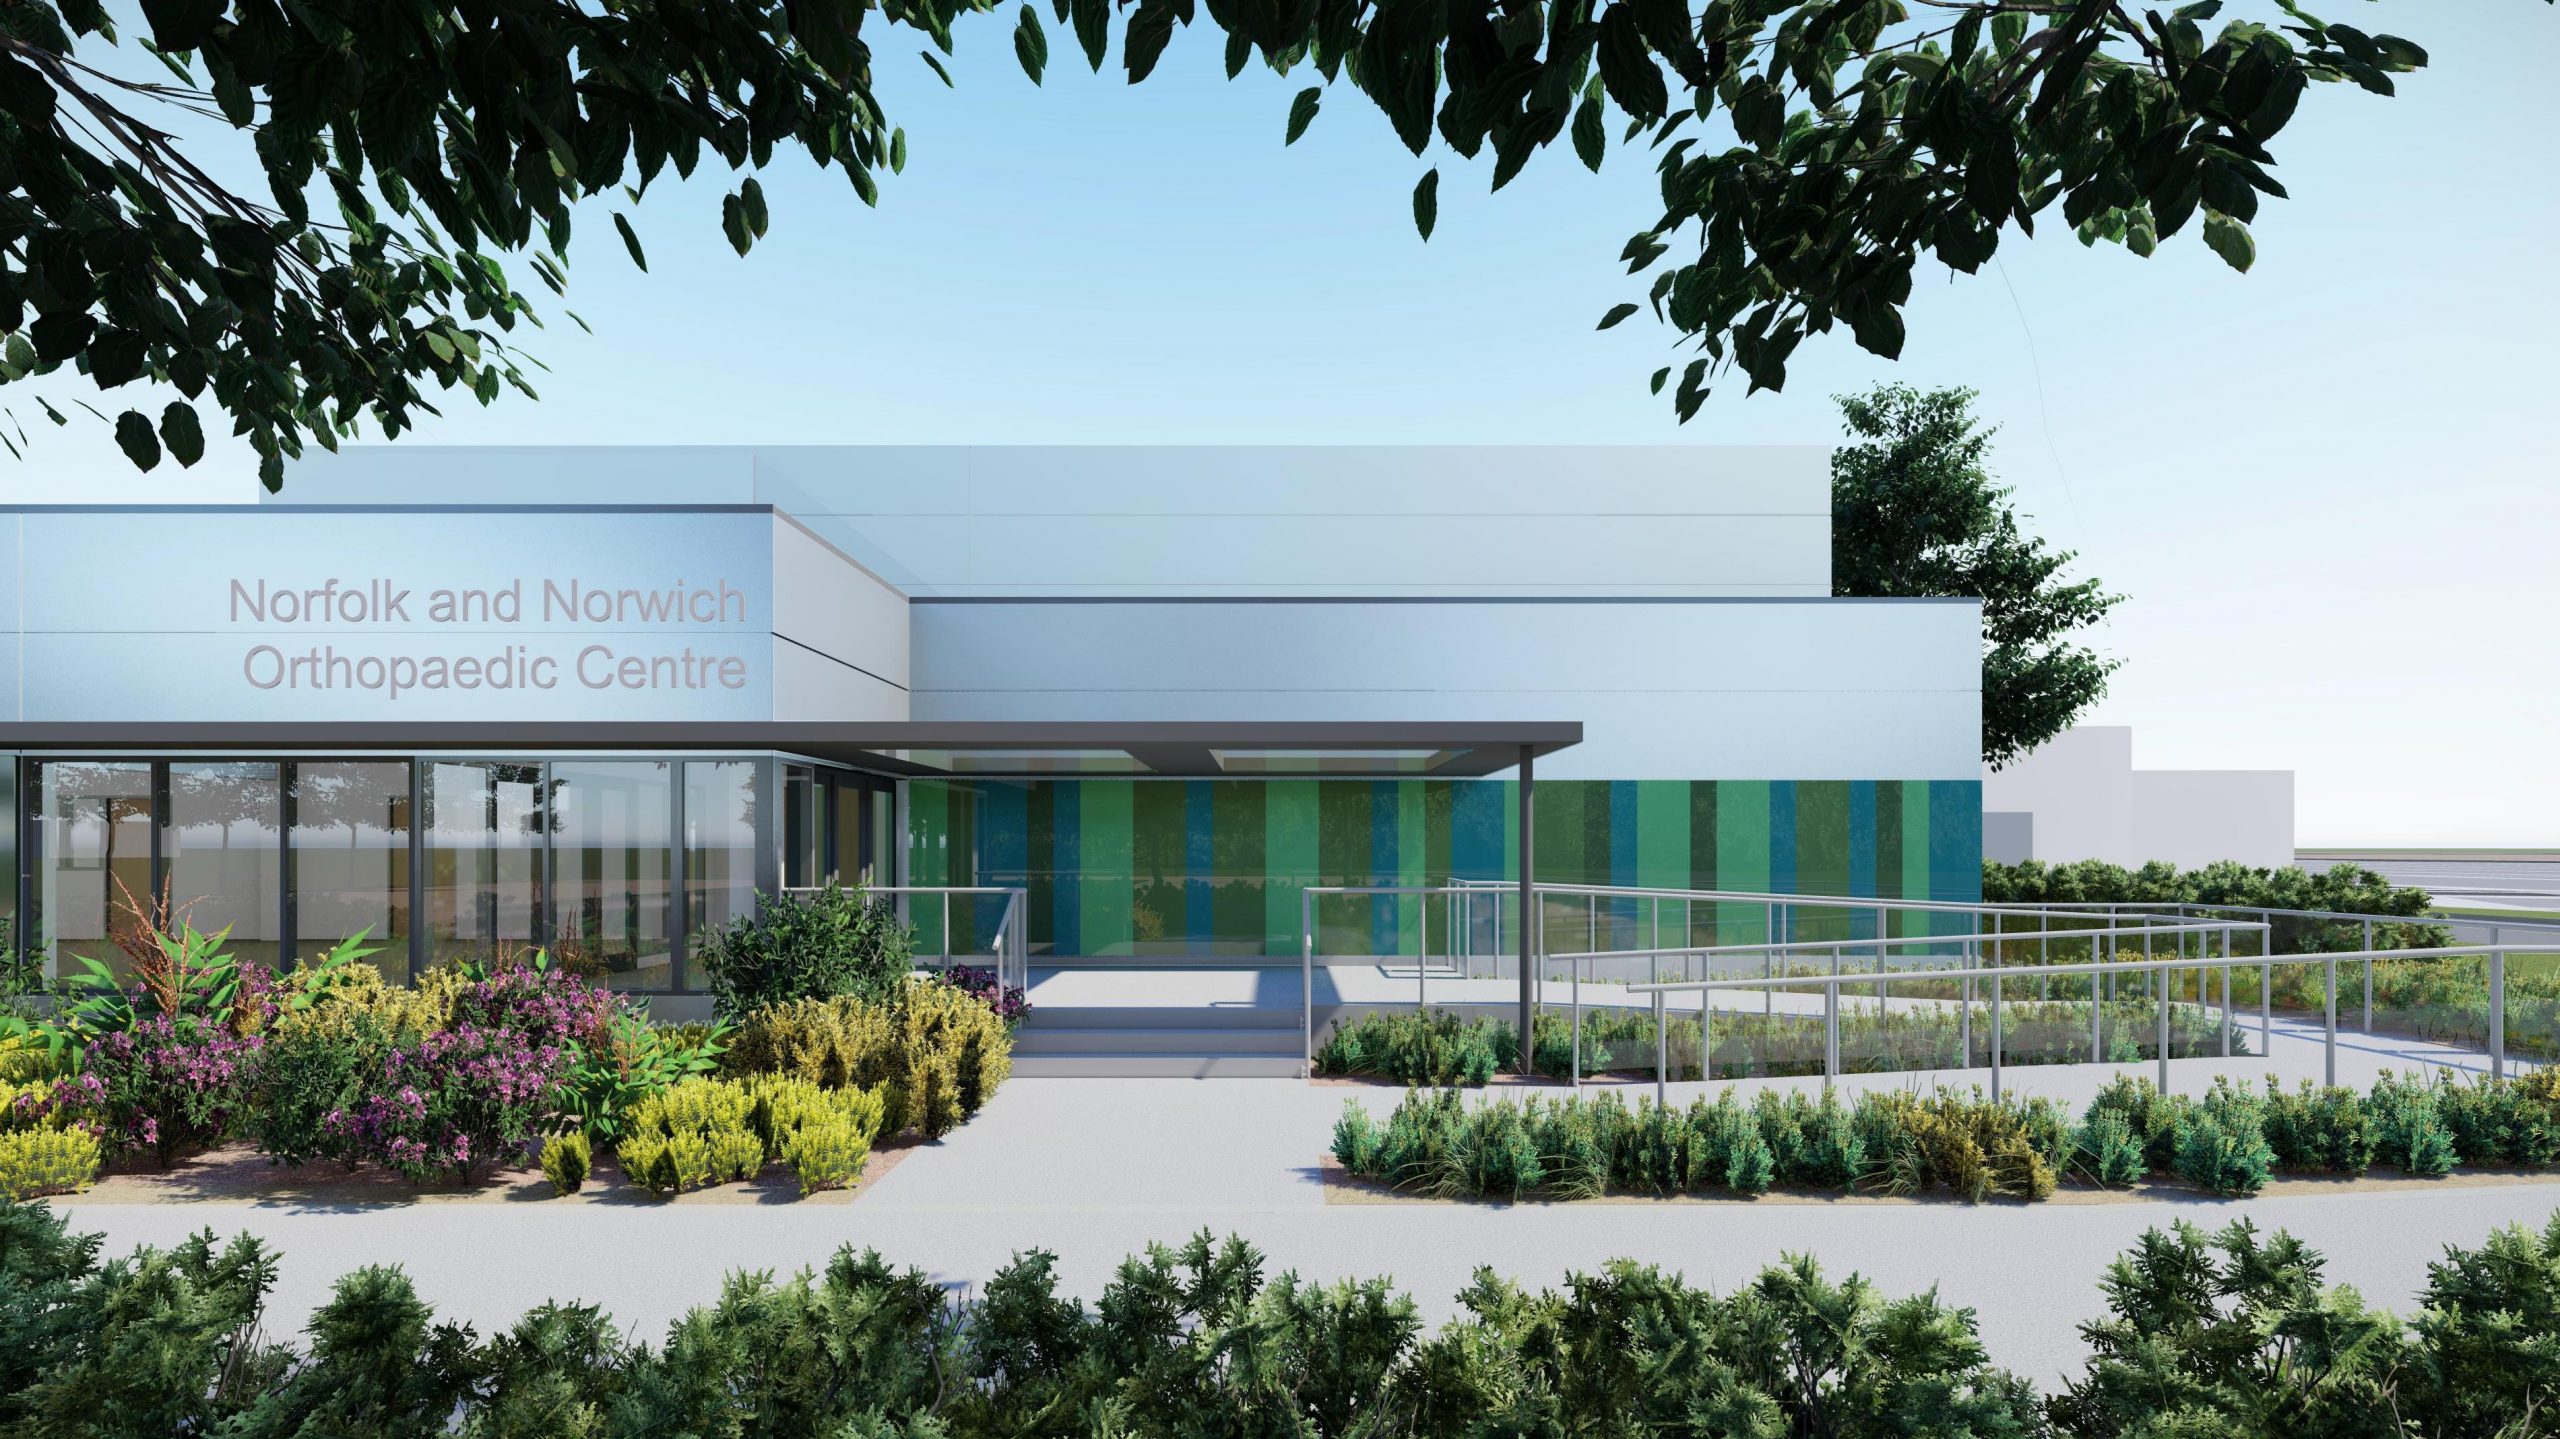 Plans for standalone orthopaedic centre